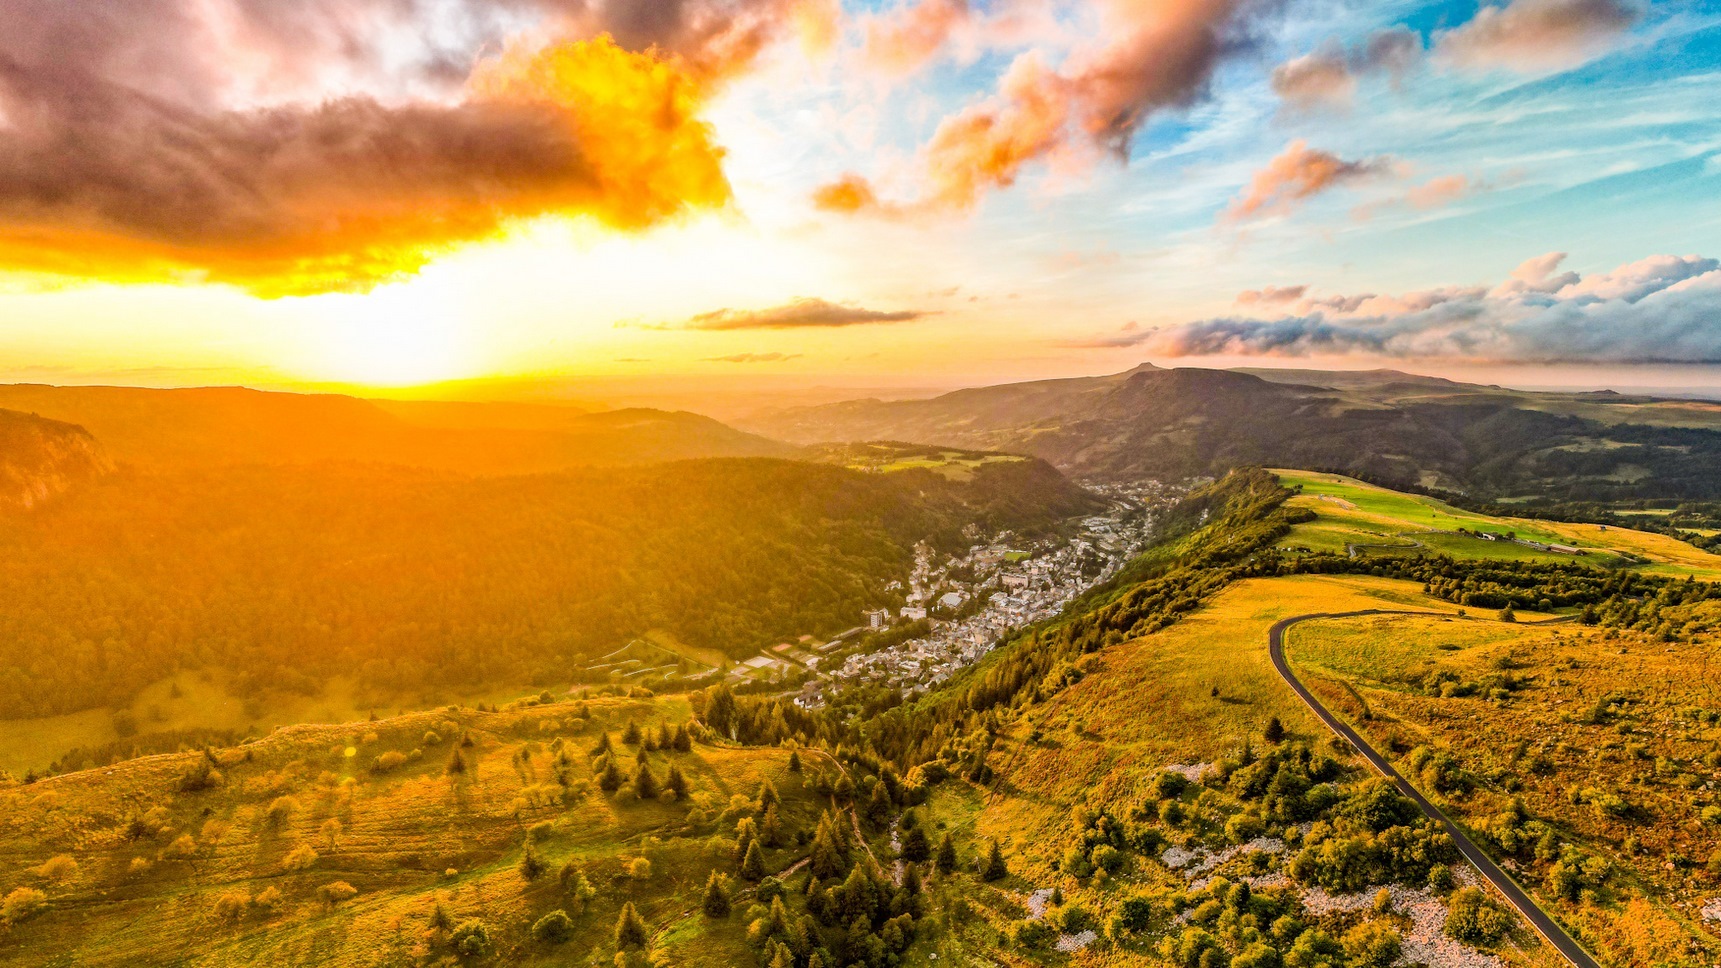 In the Sancy, sunset over the town of Mont Dore